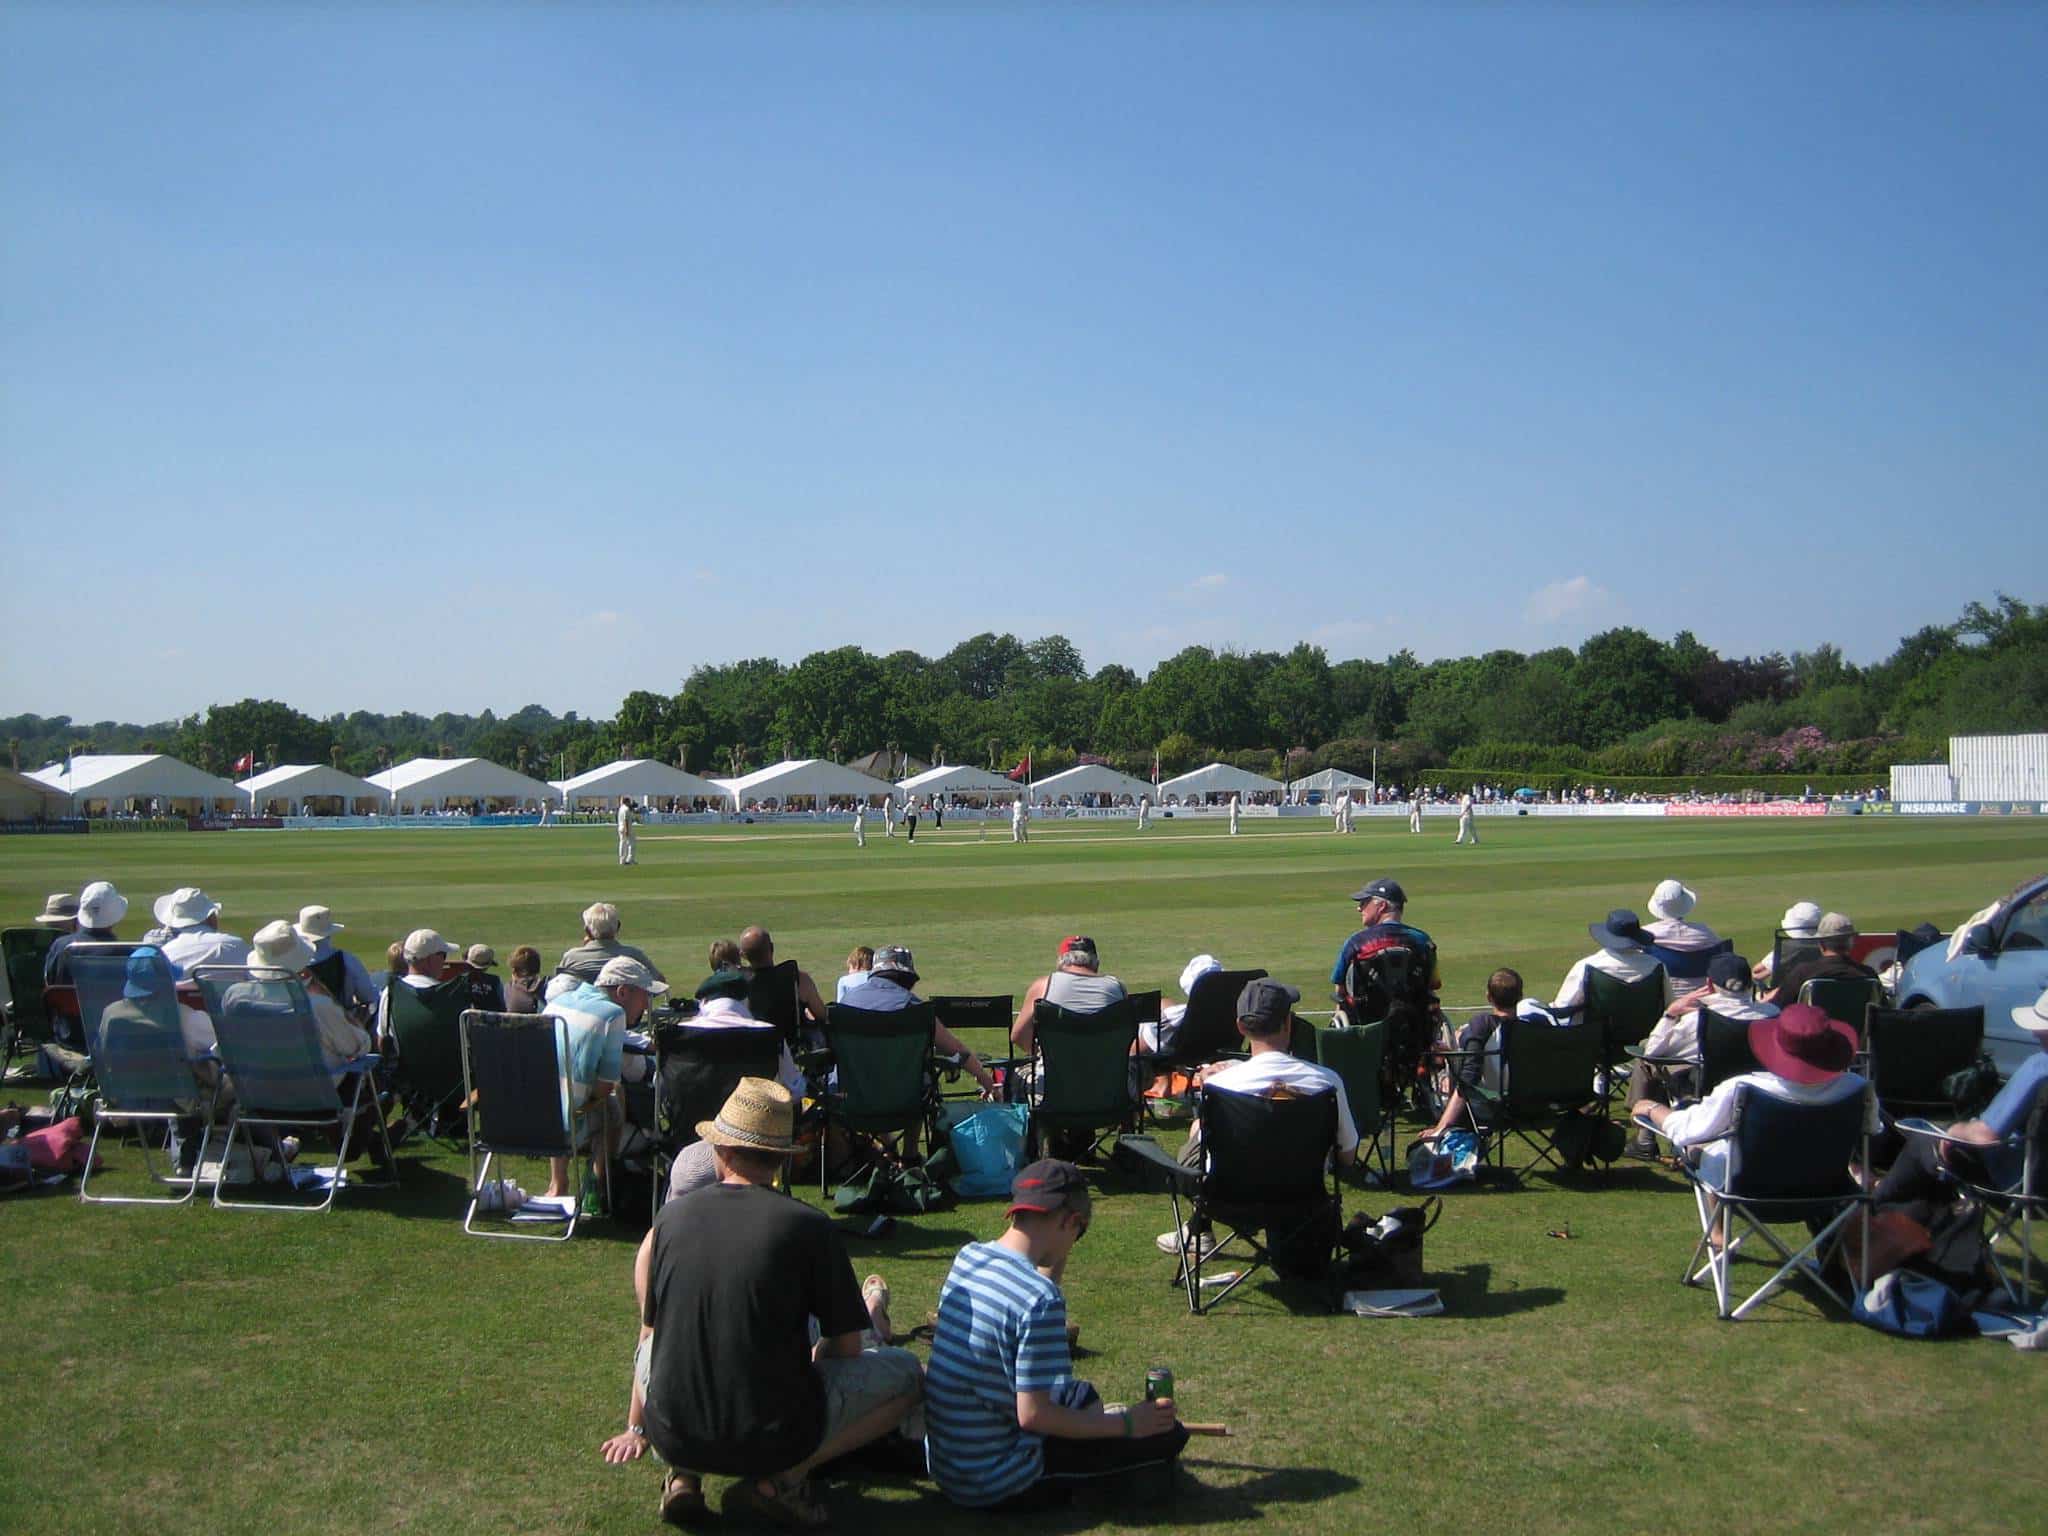 Tunbridge Wells Cricket Festival will go ahead if pitch passes inspection